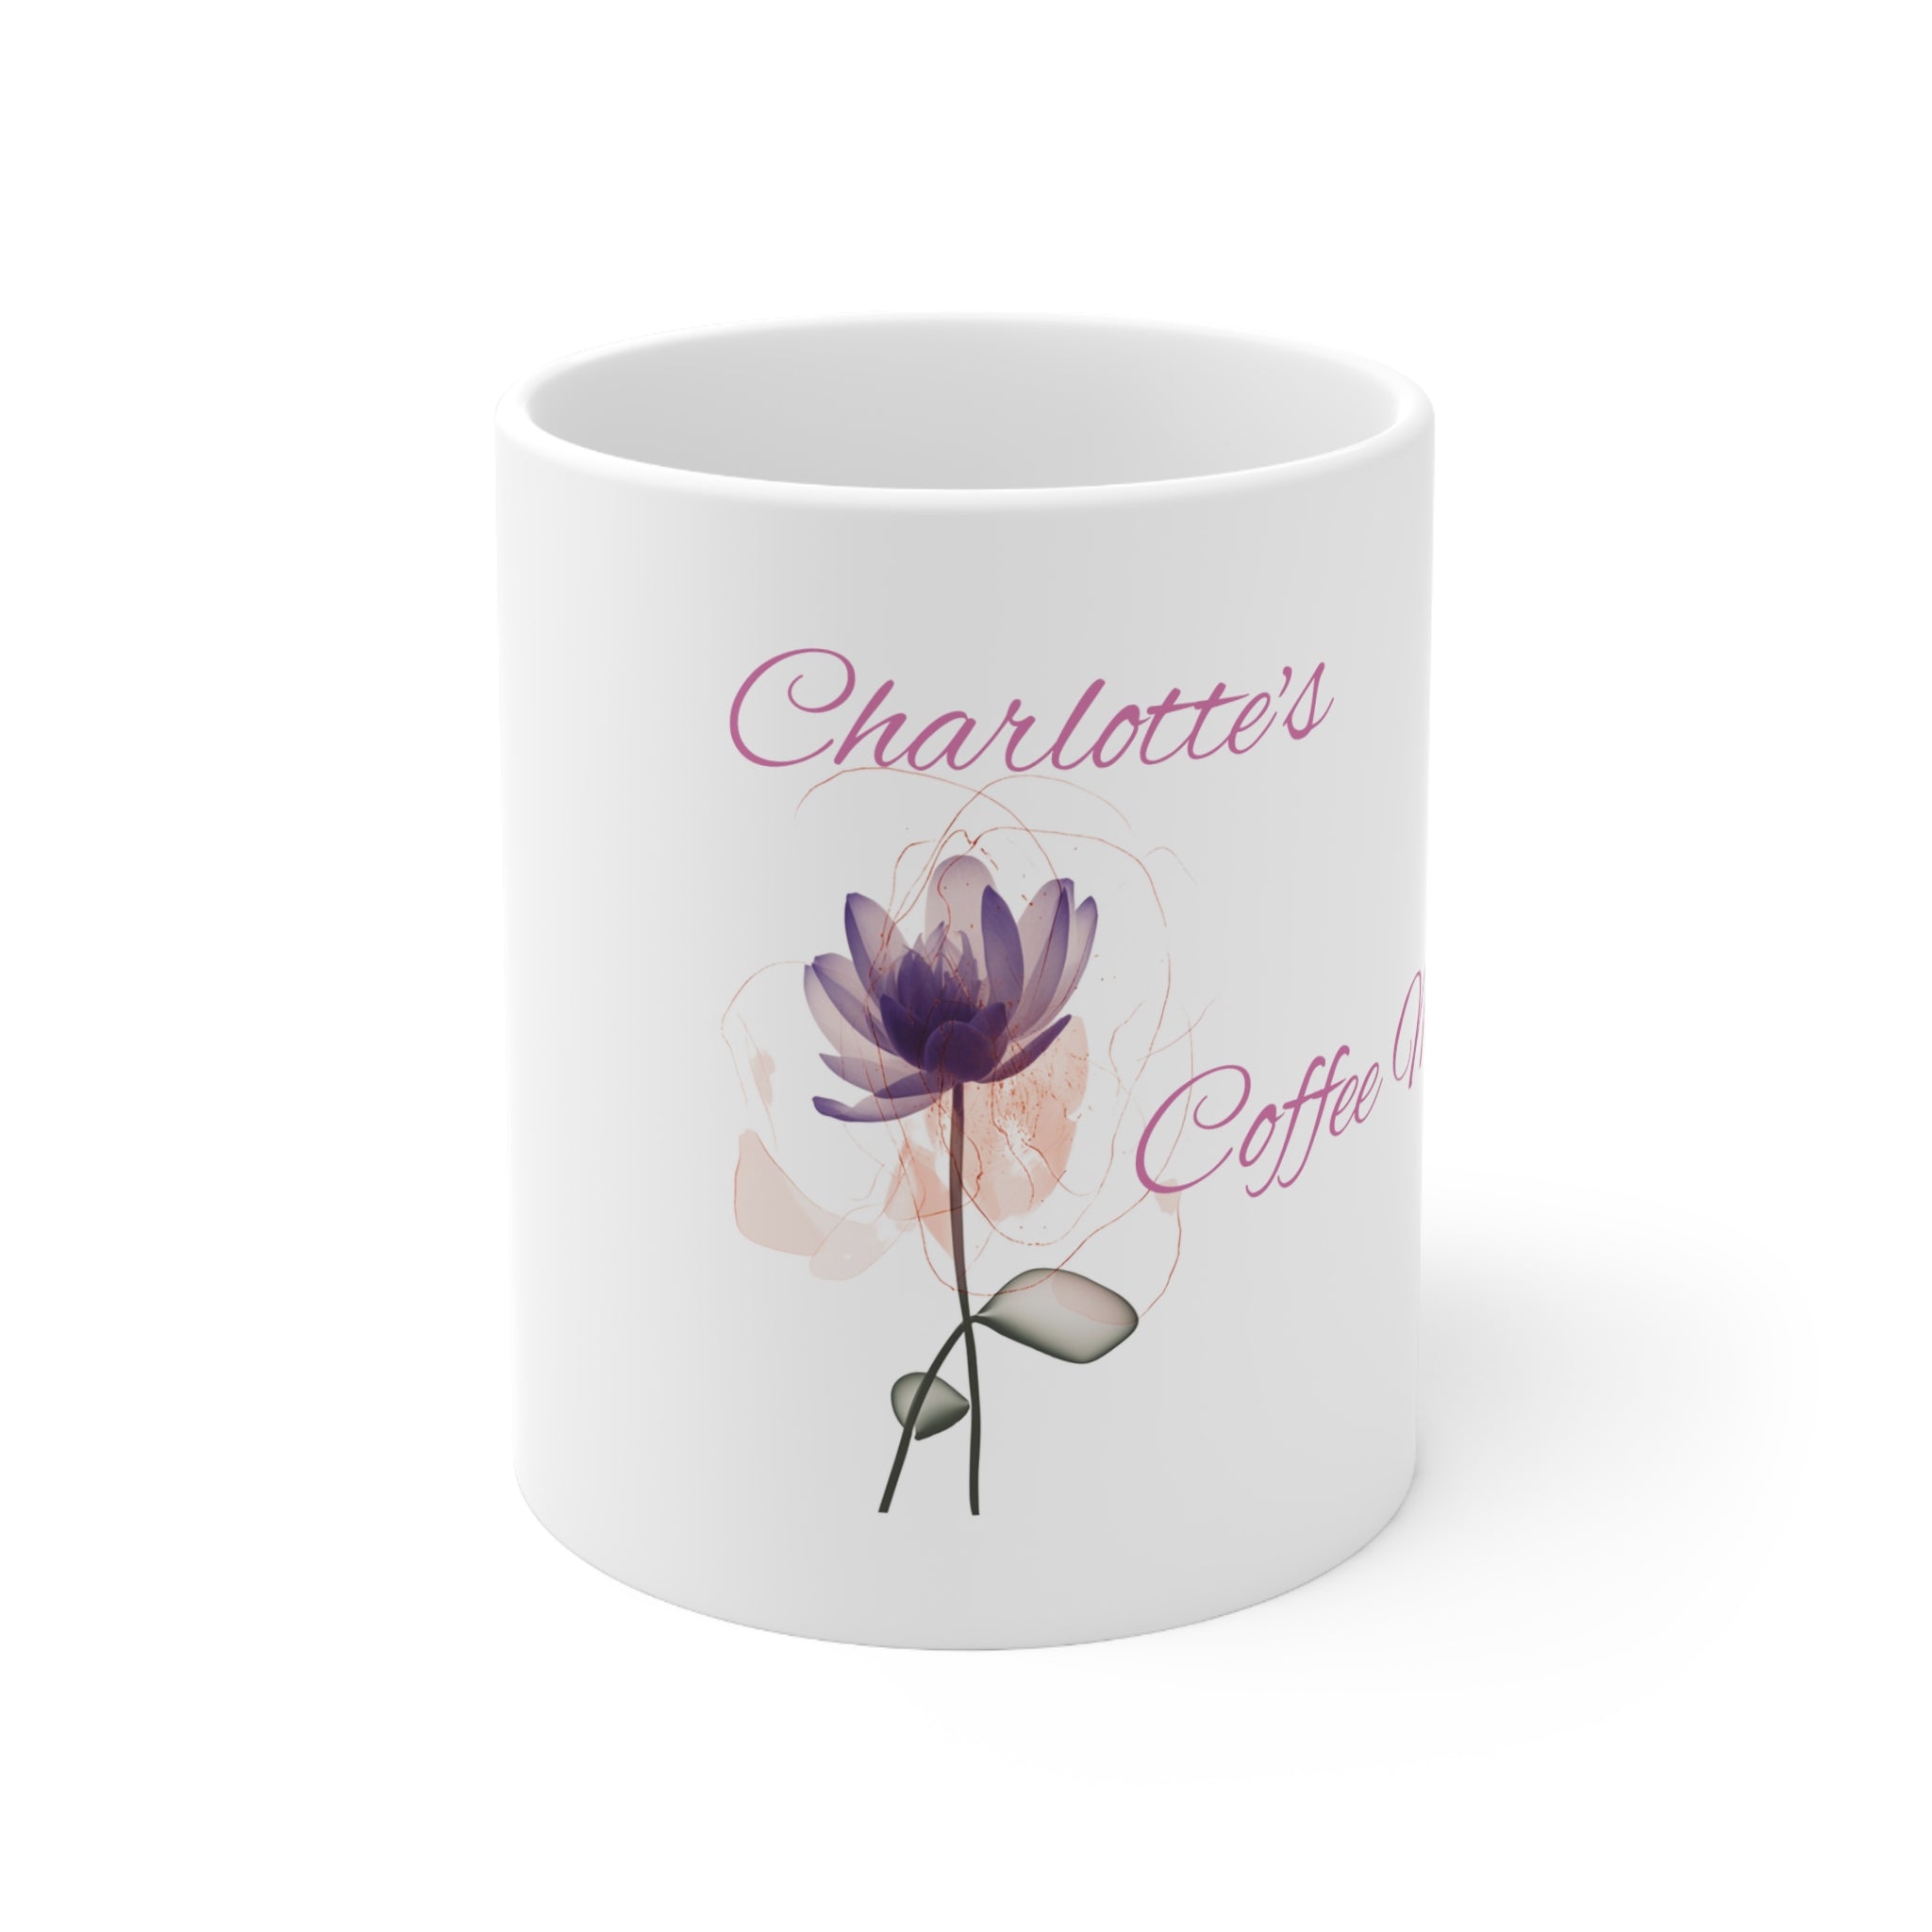 Magical Flower Charlotte's Coffee Mug - Enchanted Ceramic Gift for Office Unique Floral Ceramic Mug - Coffee Cup - Abstract Flower Drinkware